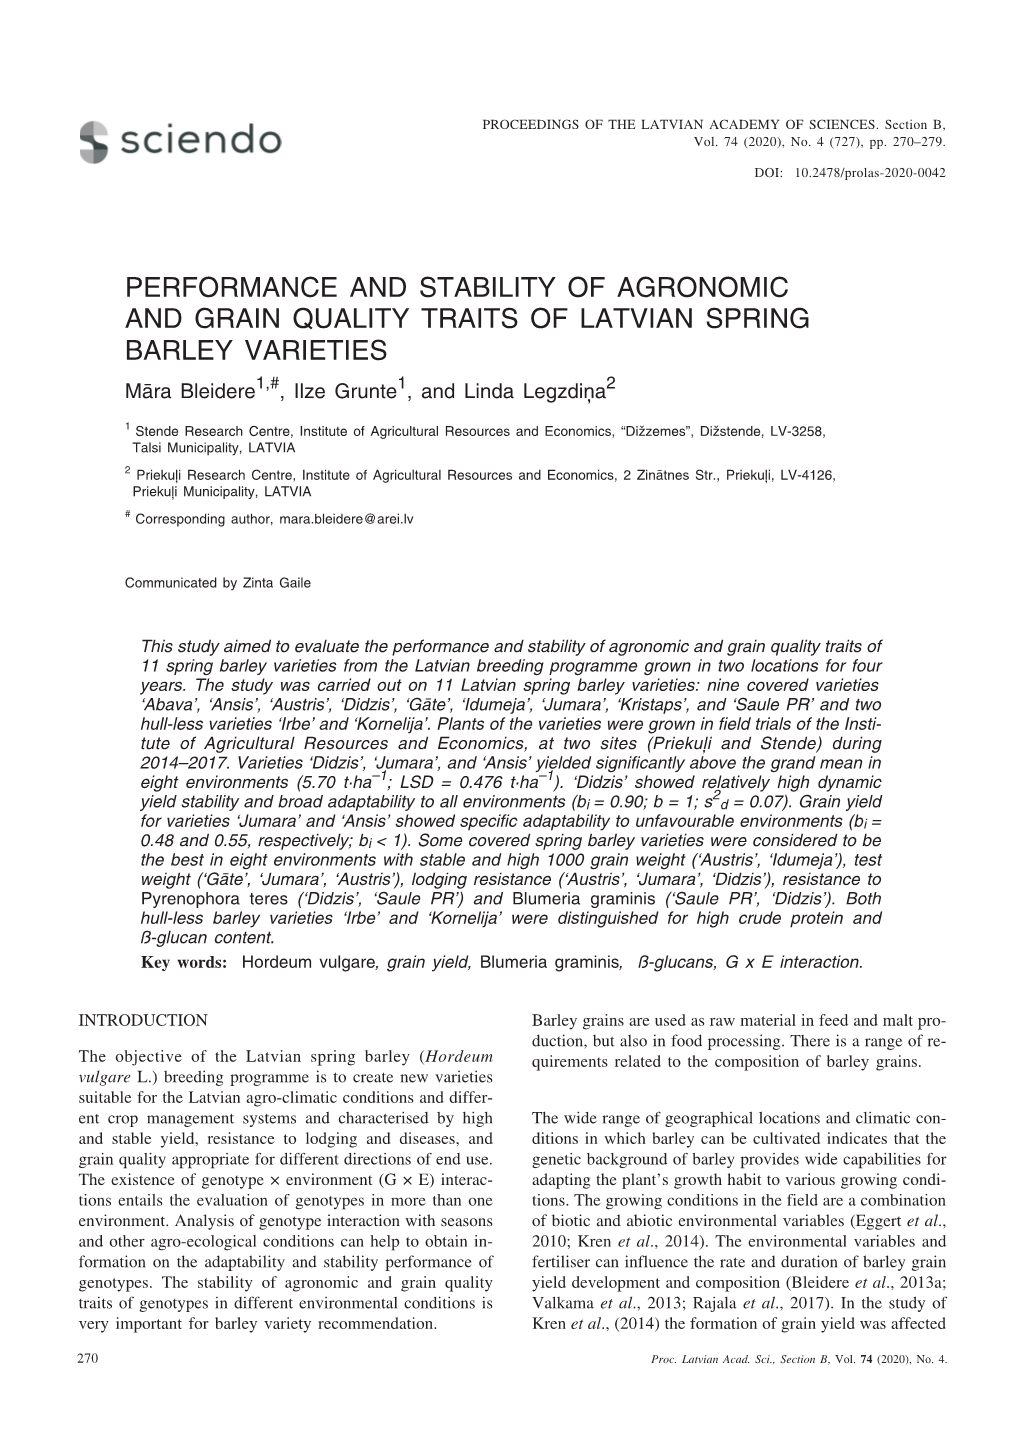 PERFORMANCE and STABILITY of AGRONOMIC and GRAIN QUALITY TRAITS of LATVIAN SPRING BARLEY VARIETIES Mâra Bleidere1,#, Ilze Grunte1, and Linda Legzdiòa2